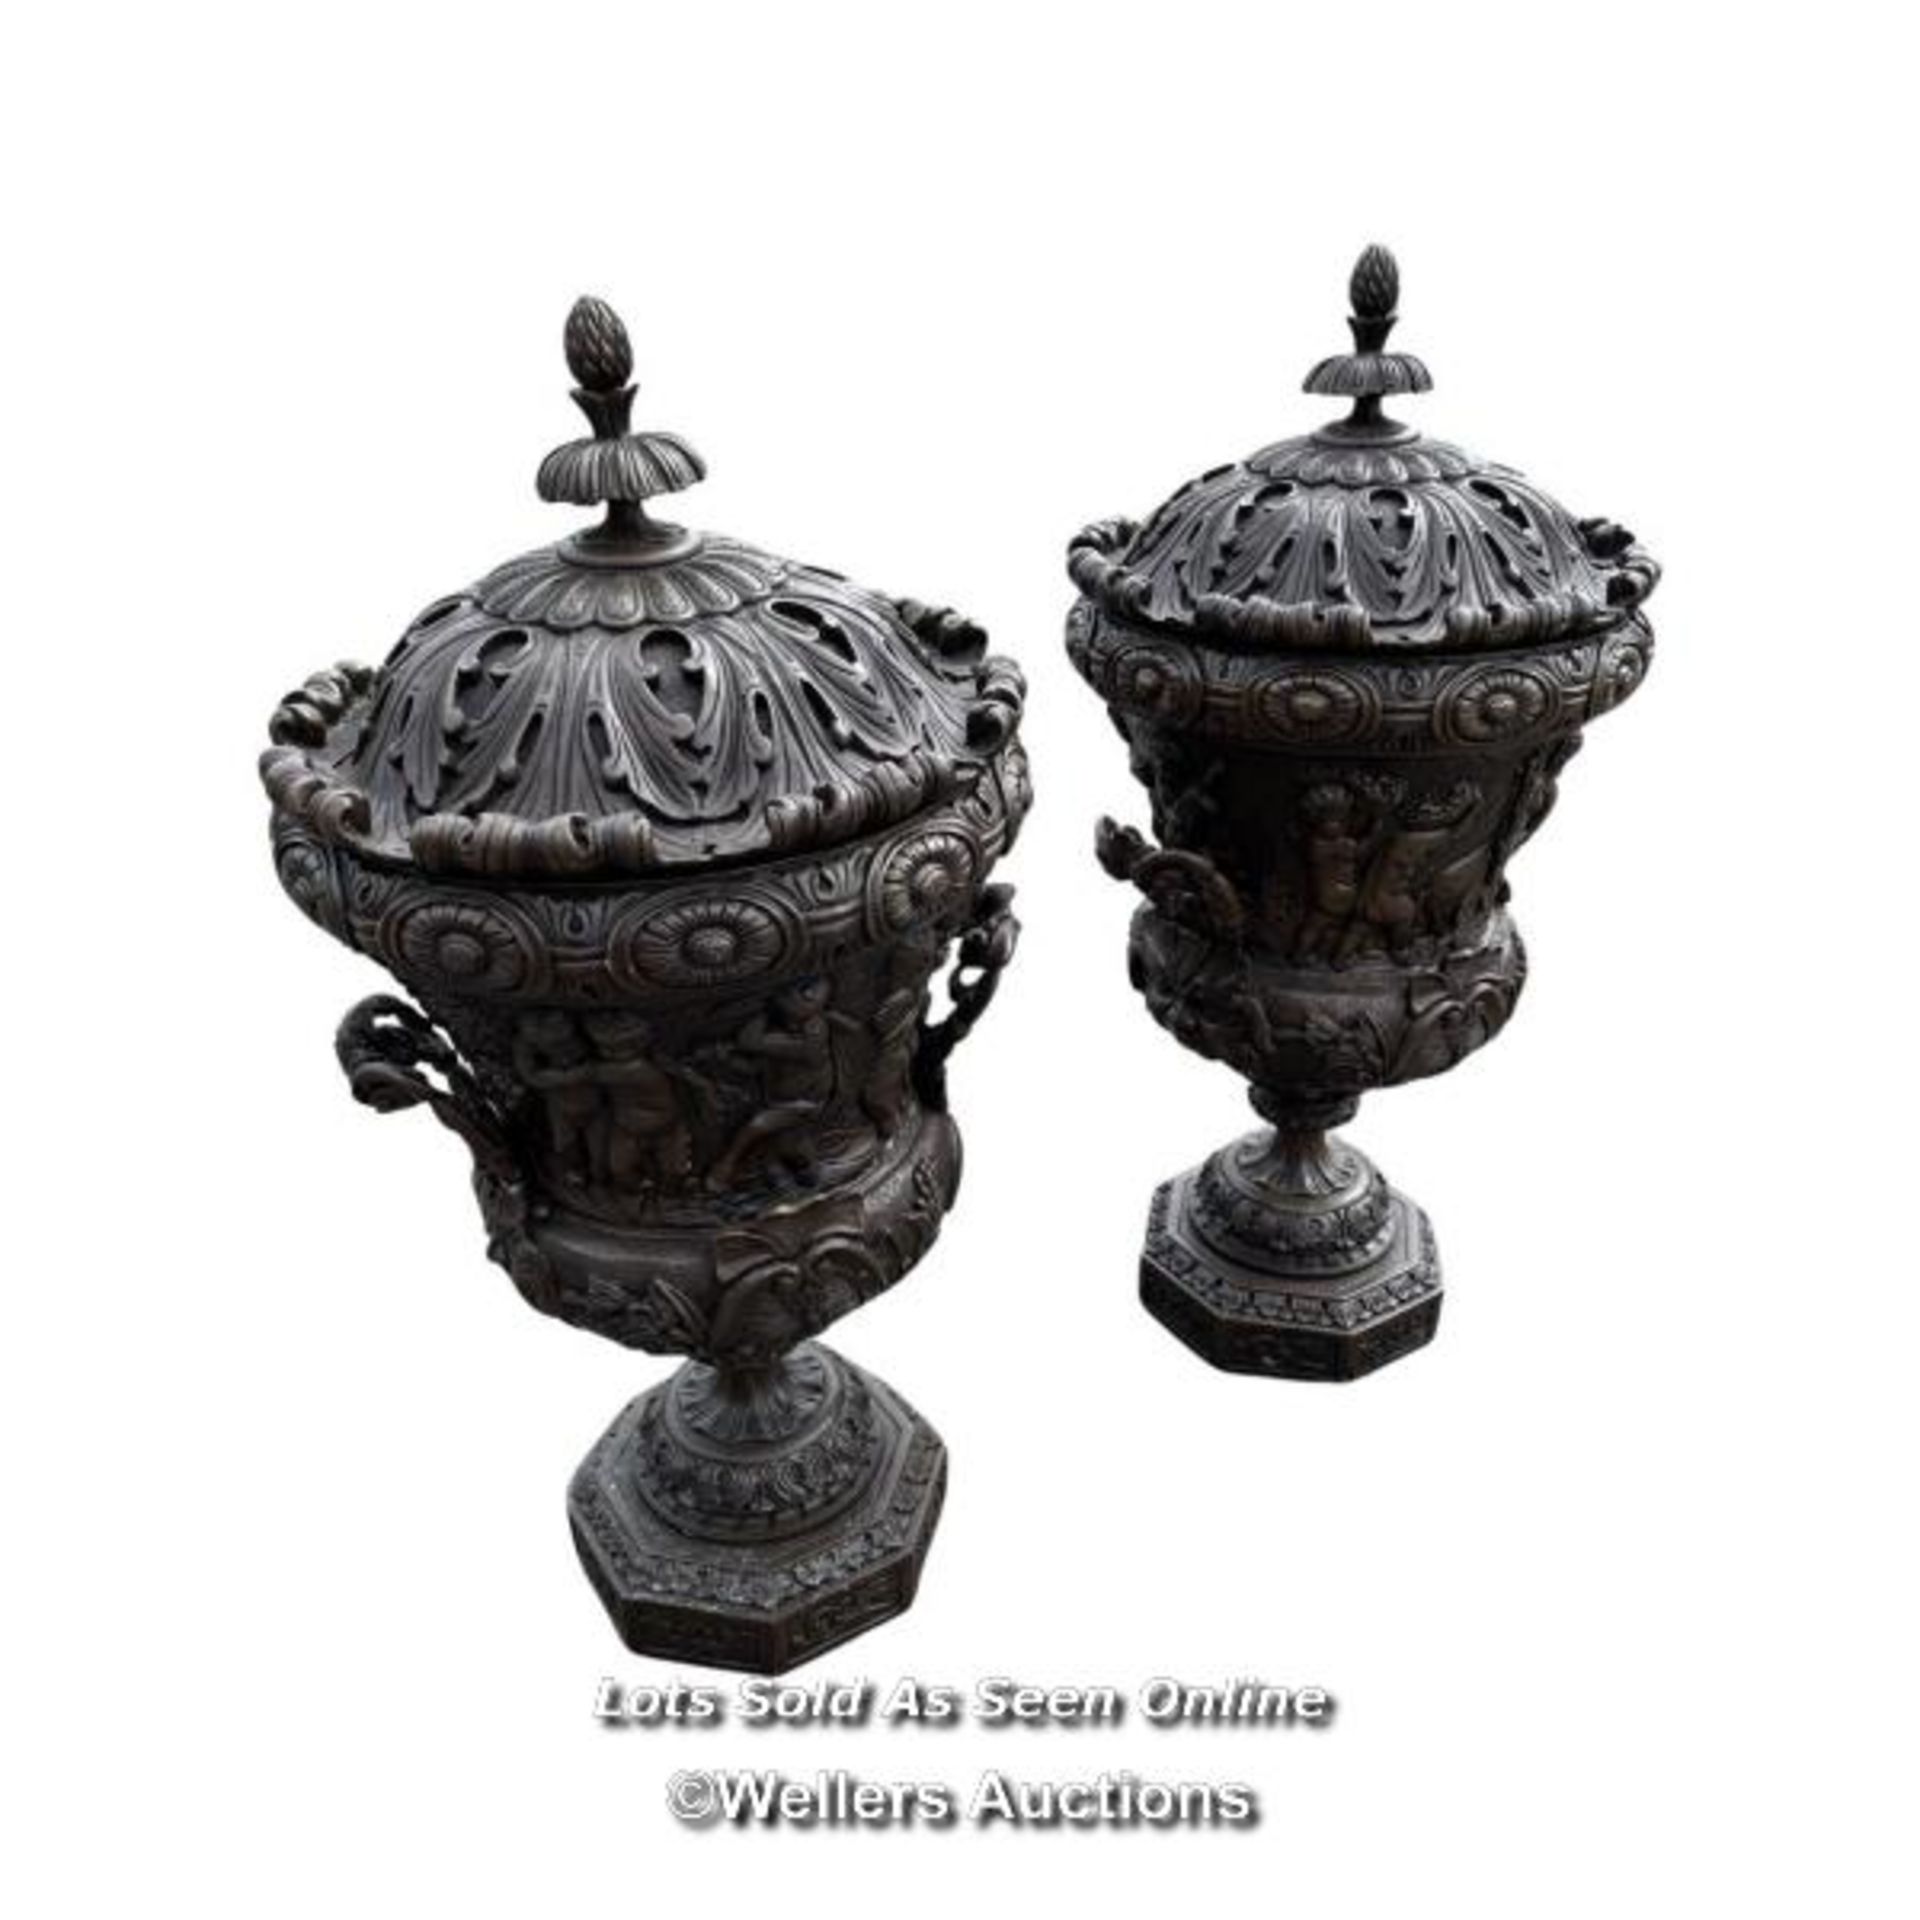 *PAIR OF LARGE ORNATE URN FINIALS IN CAST BRONZE WITH REMOVEABLE LIDS, DISPLAYING SCENES OF